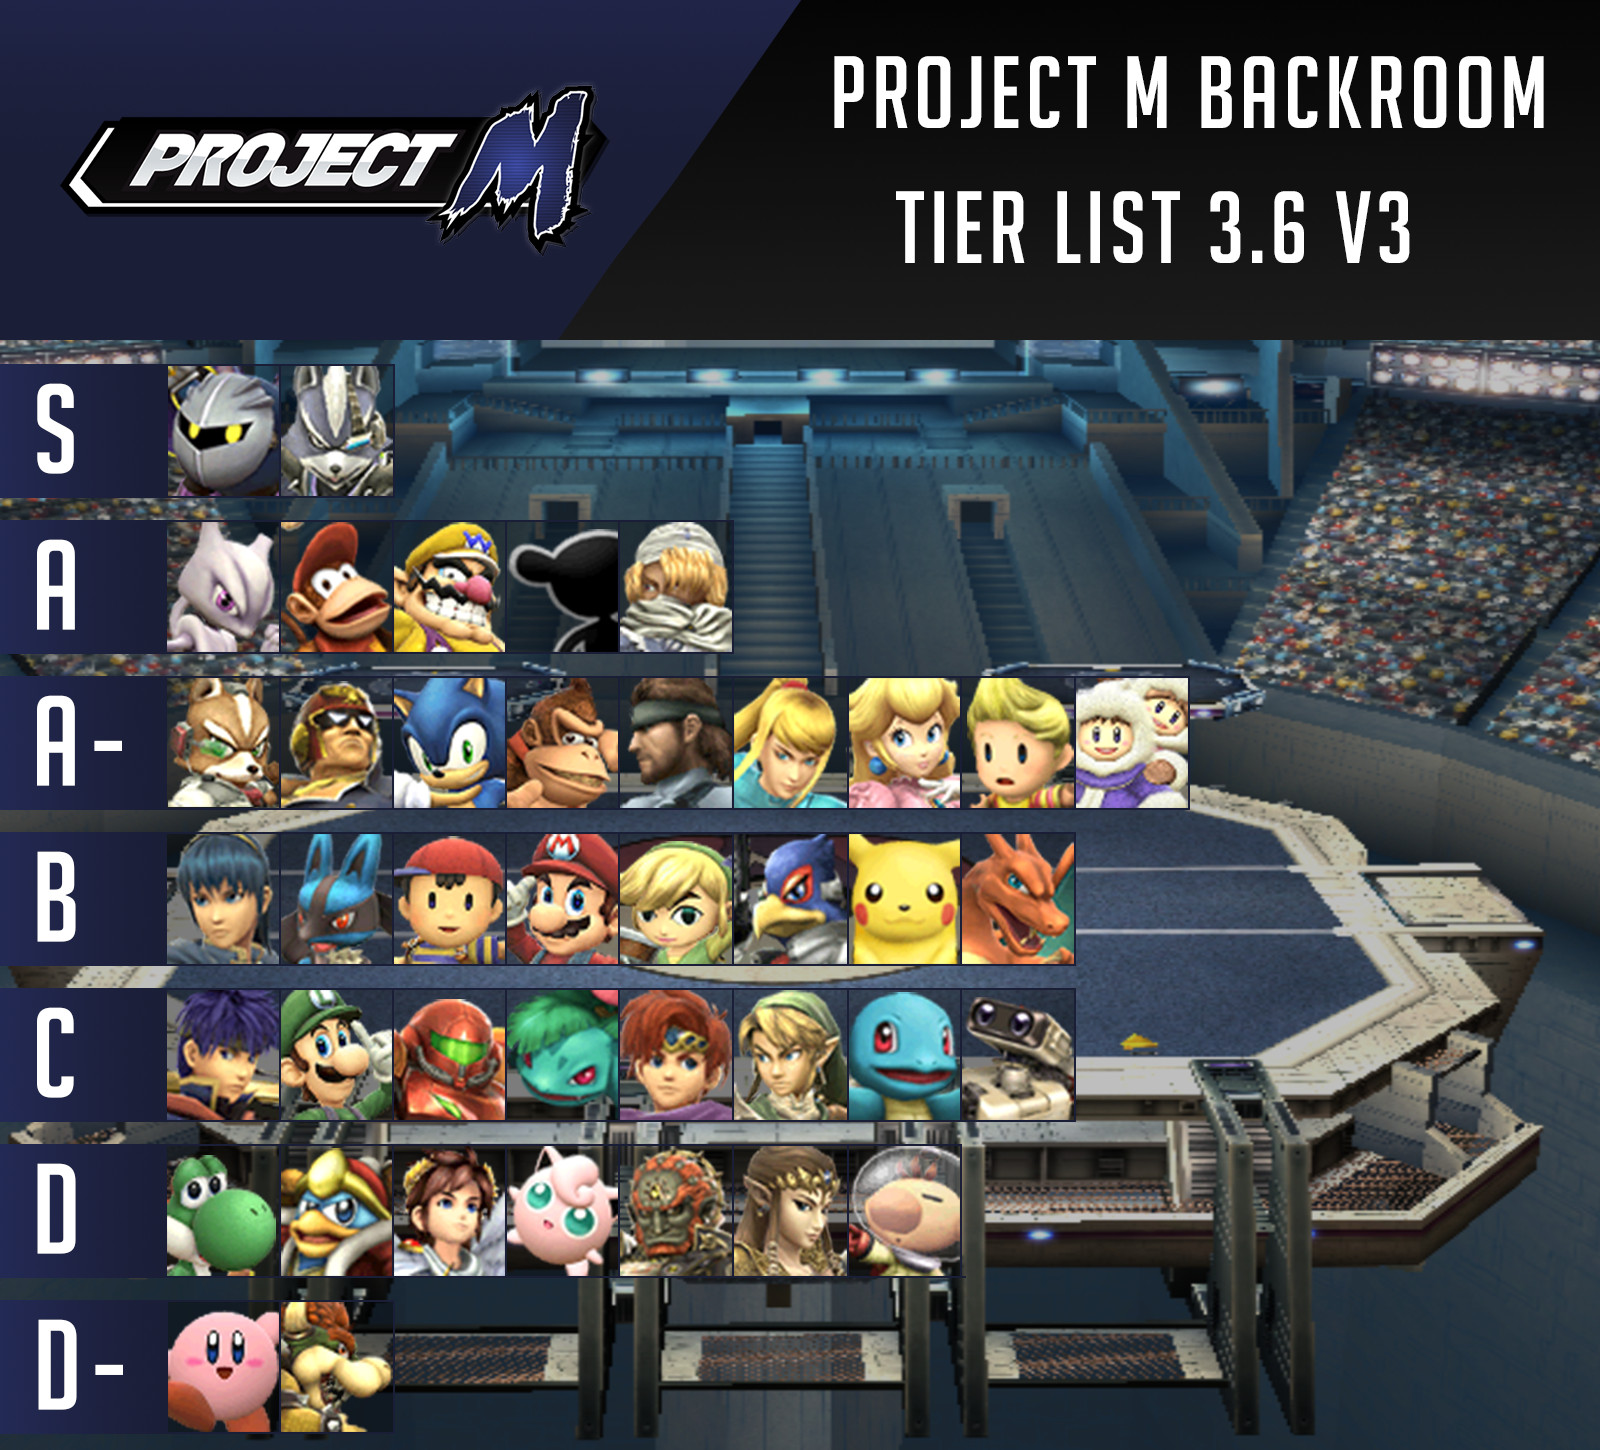 The Project M Backroom Releases New Pm 3 6 Tier List